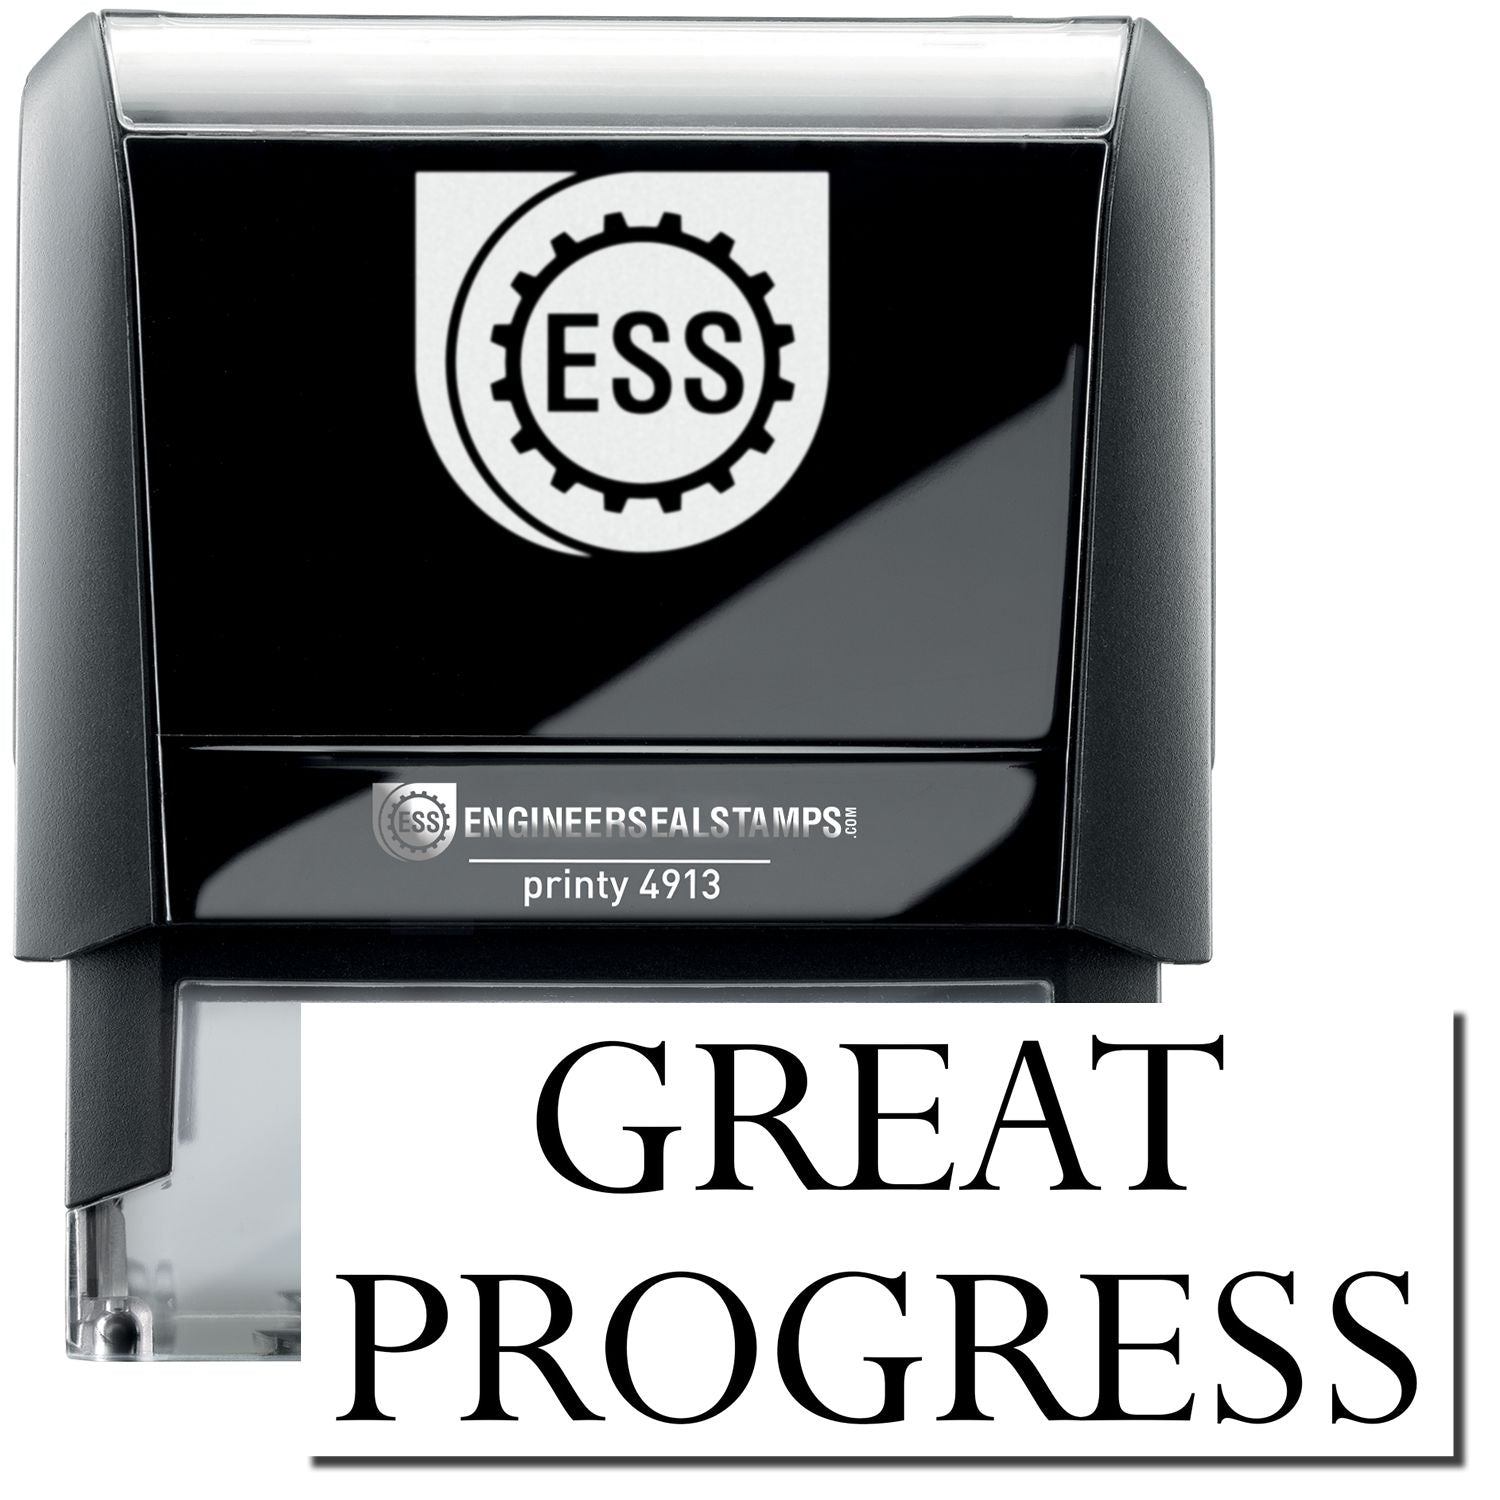 A self-inking stamp with a stamped image showing how the text "GREAT PROGRESS" in a large bold font is displayed by it.